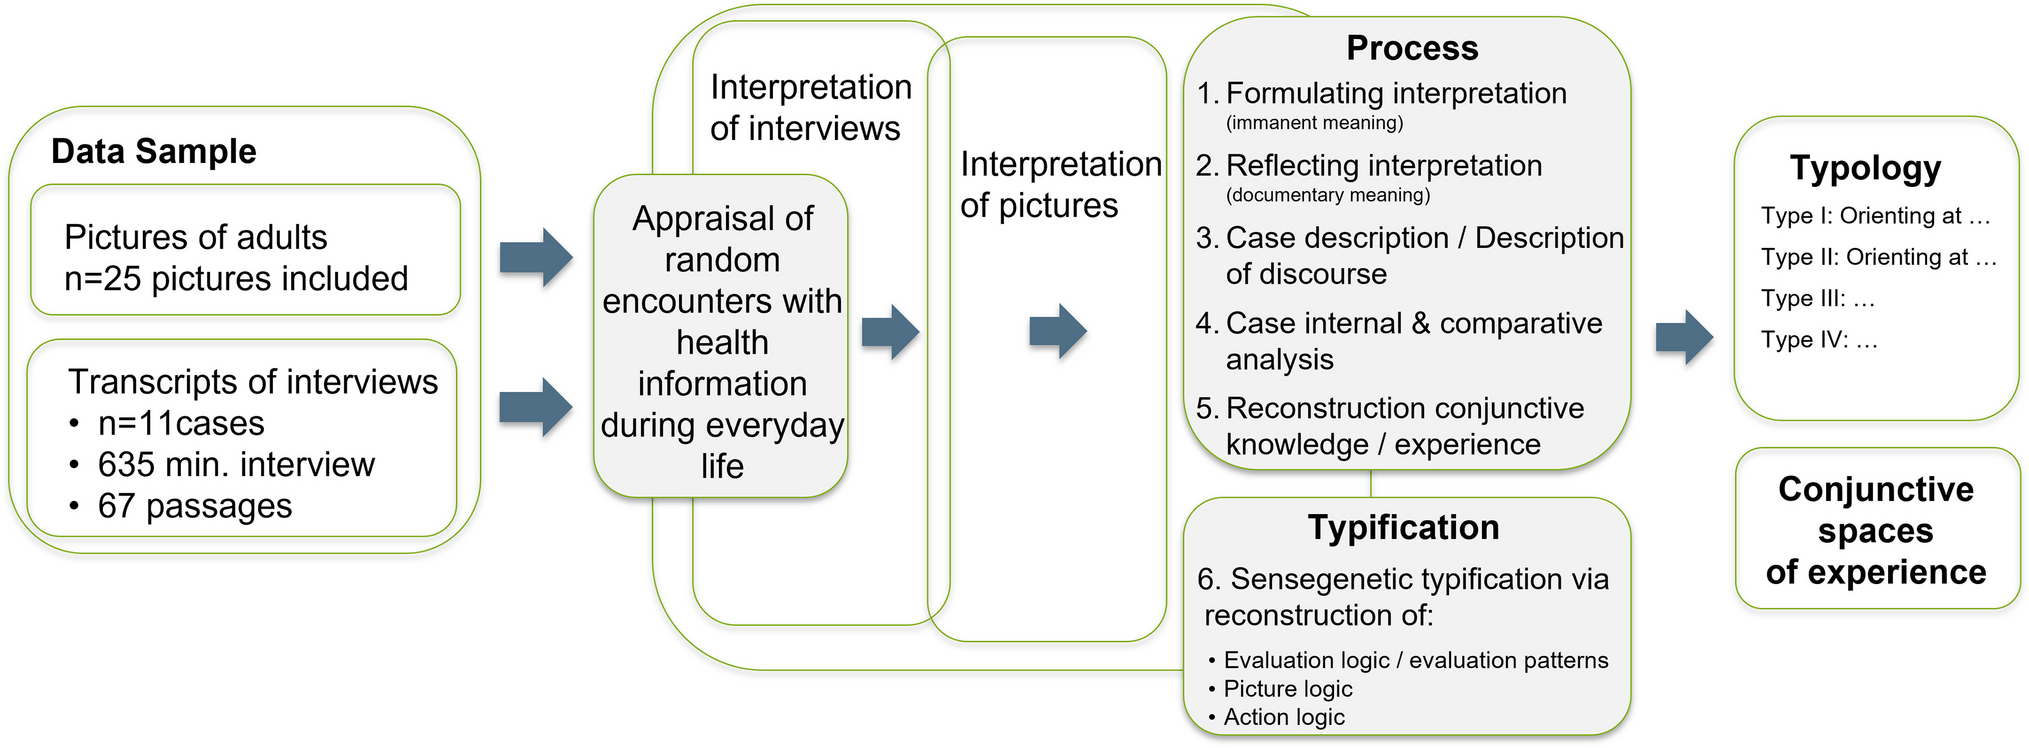 Pervasiveness of health information in everyday life in Germany: insights from a photo-elicitation diary study on implicit health knowledge using the documentary method